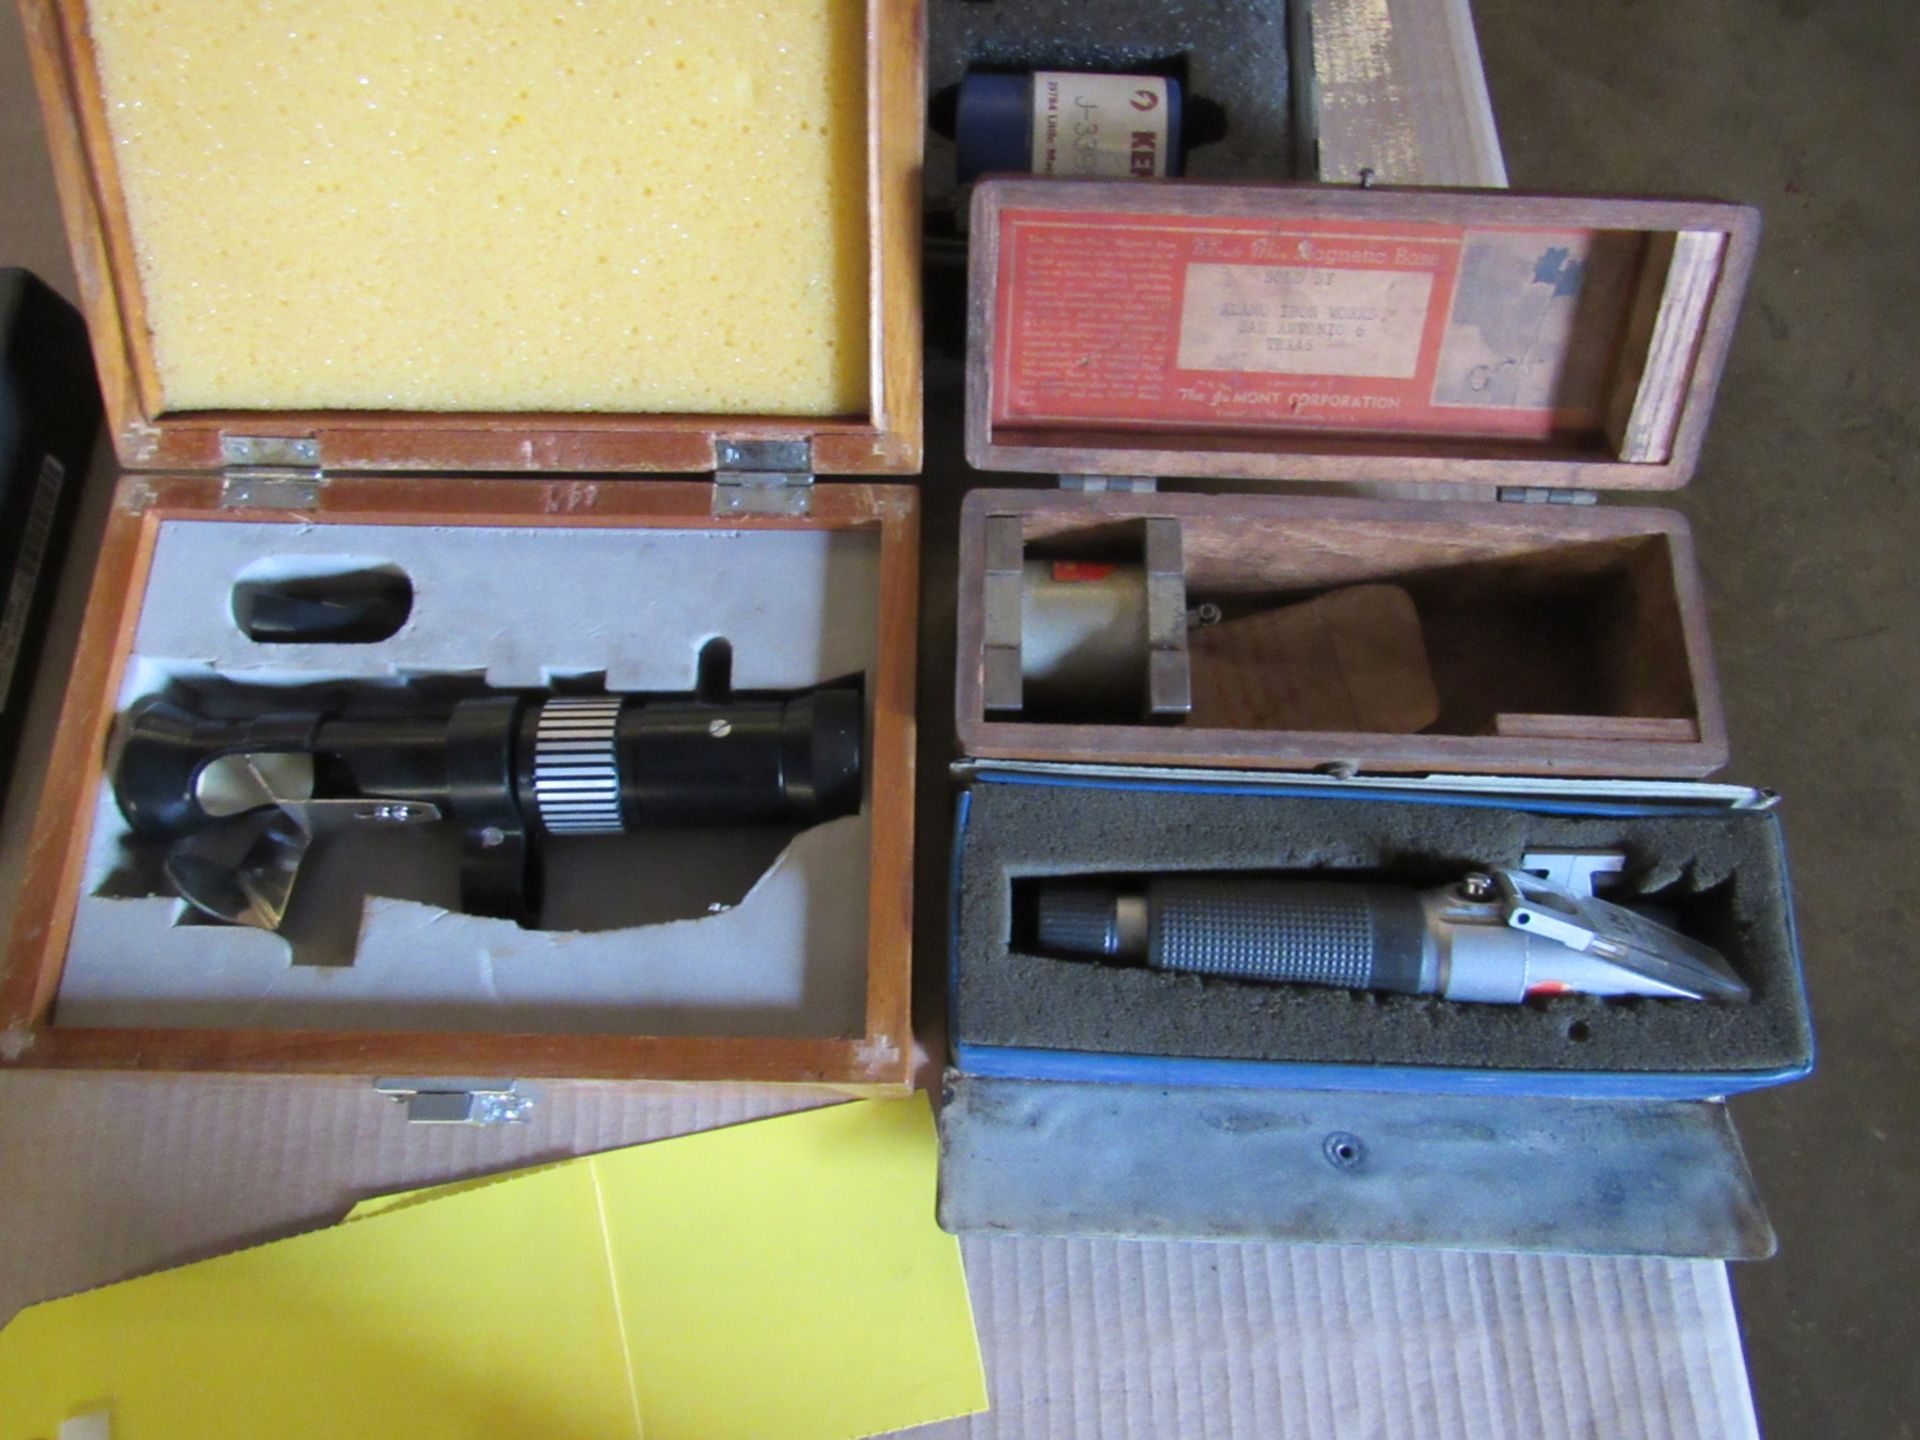 Lot of 3: Refractor Hardness Scope; Steering Gear Tool Kit; Magnetic Multi-Hole Imager